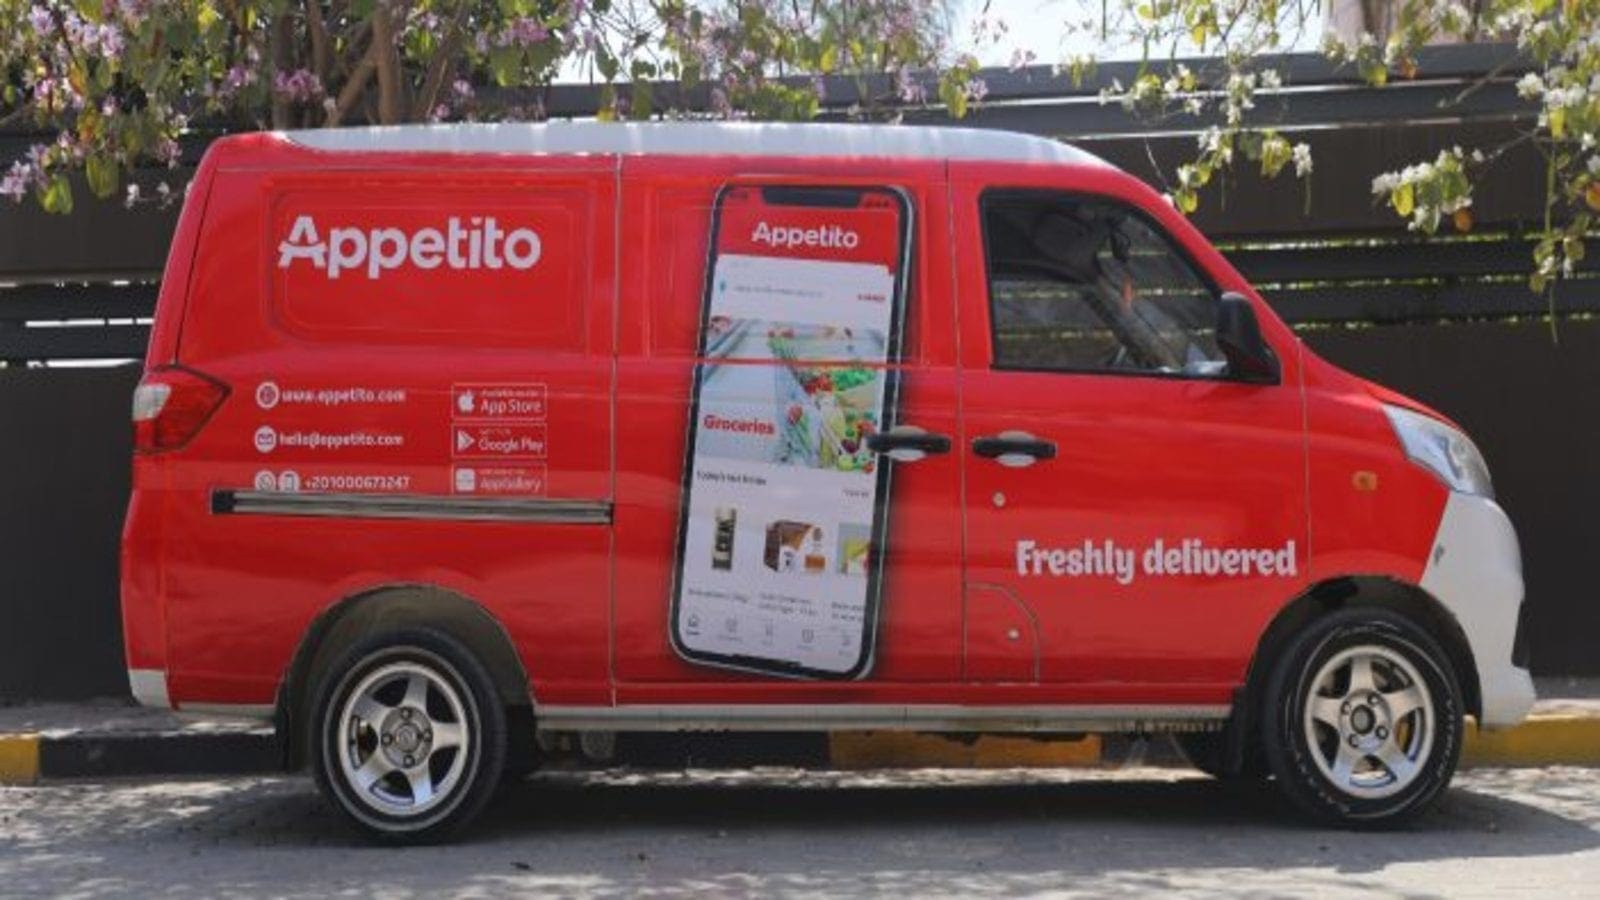 Egyptian grocery delivery startup Appetito raises funding for expansion